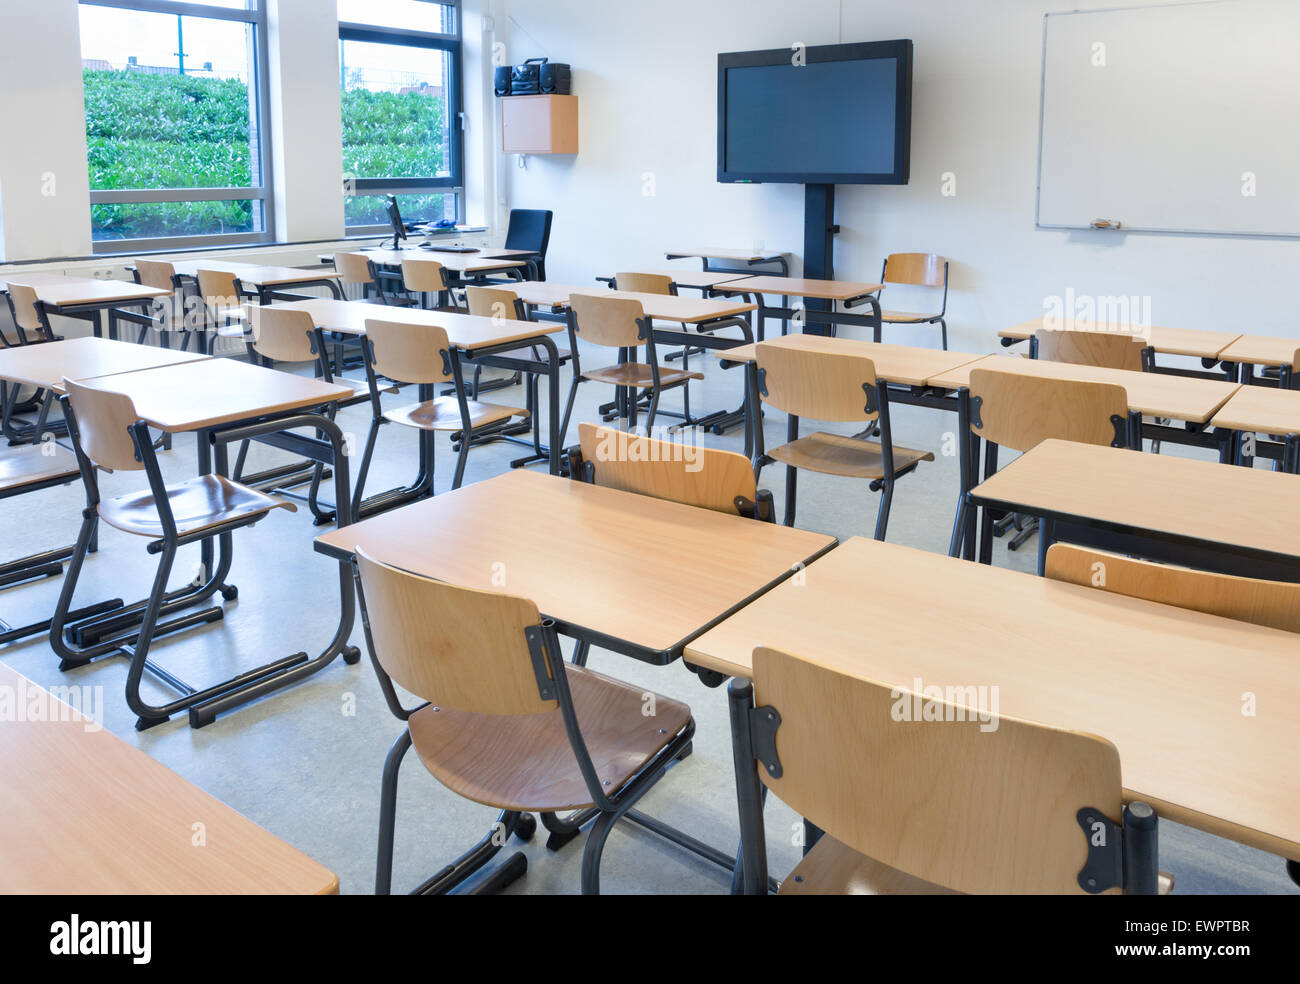 Empty Classroom With Tables And Chairs In School Building Stock Photo Alamy